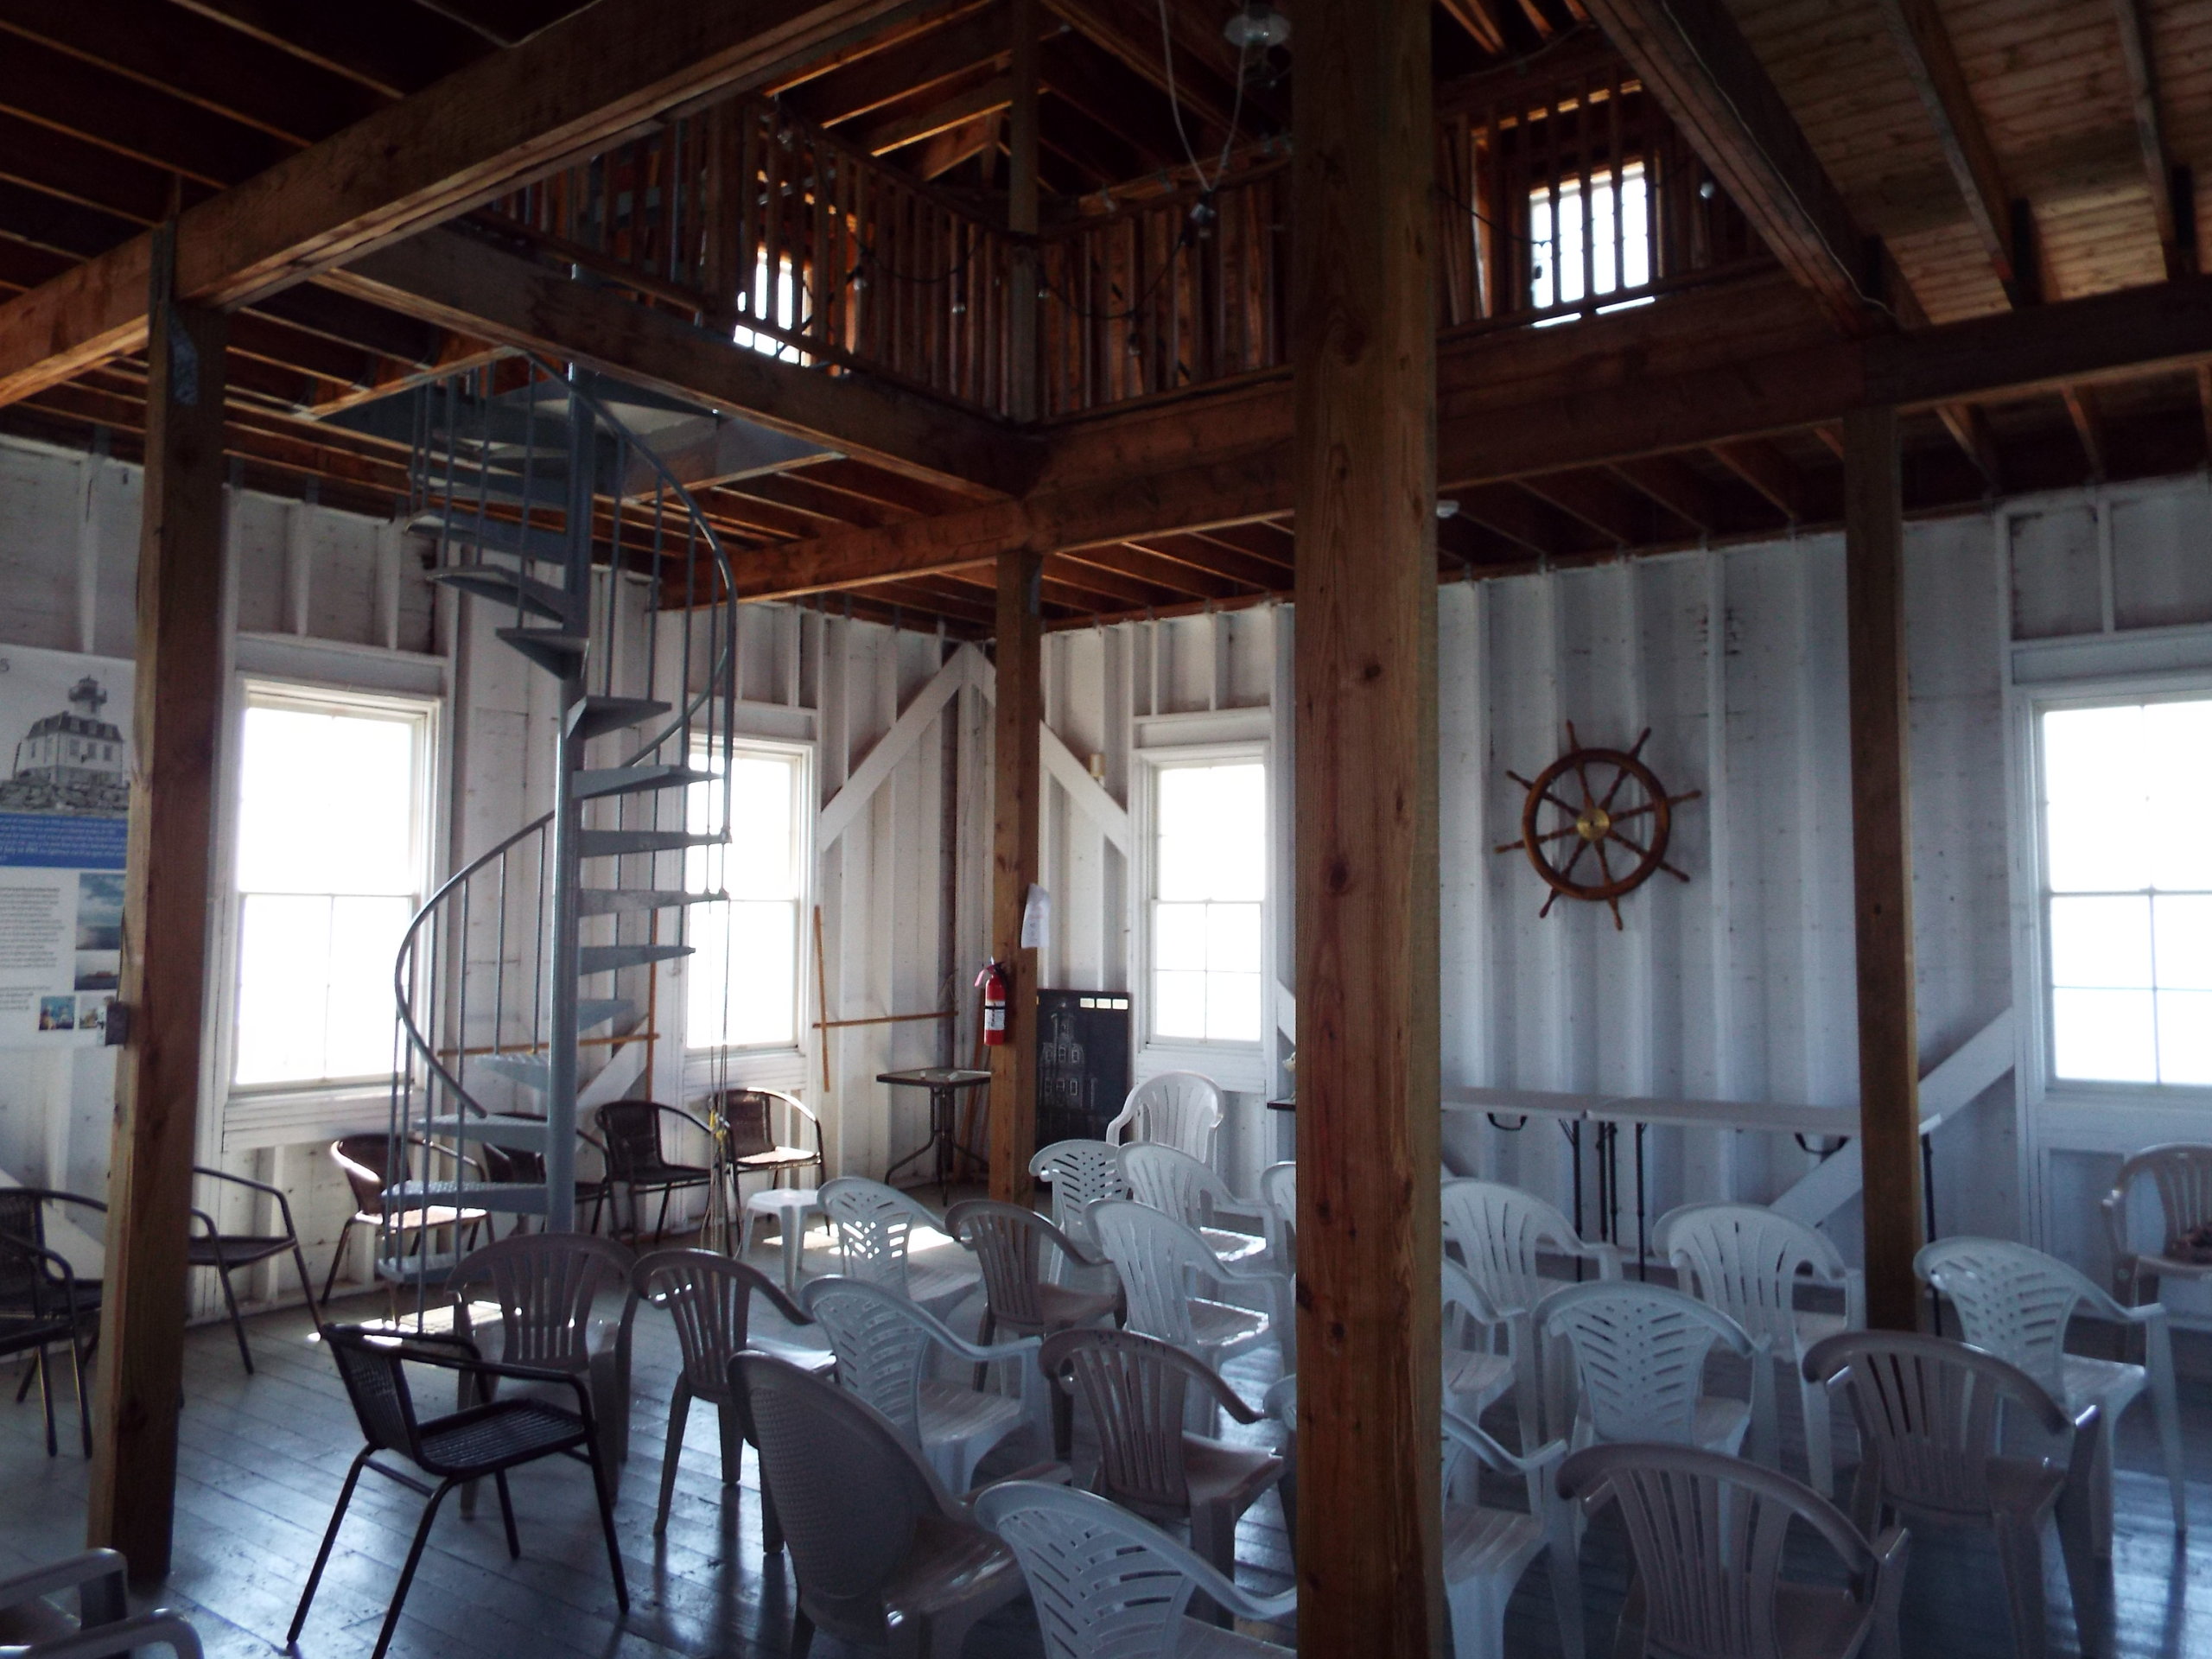 Inside Bug Light, where Saturday tour groups come to learn of its history 